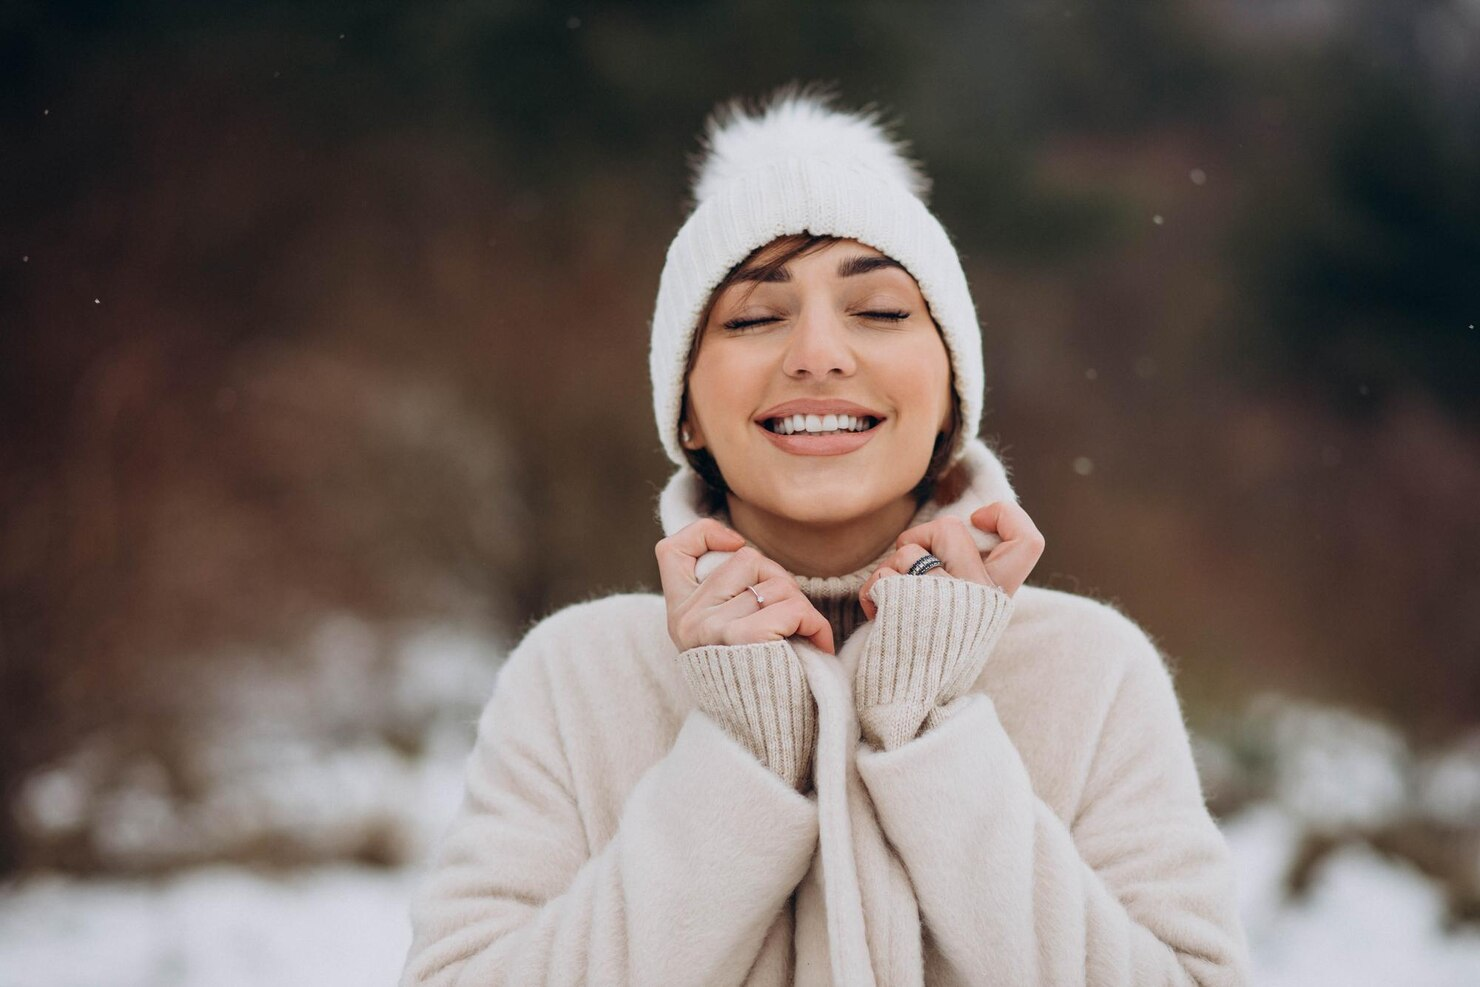 A woman in a winter hat smiling on a cold day.